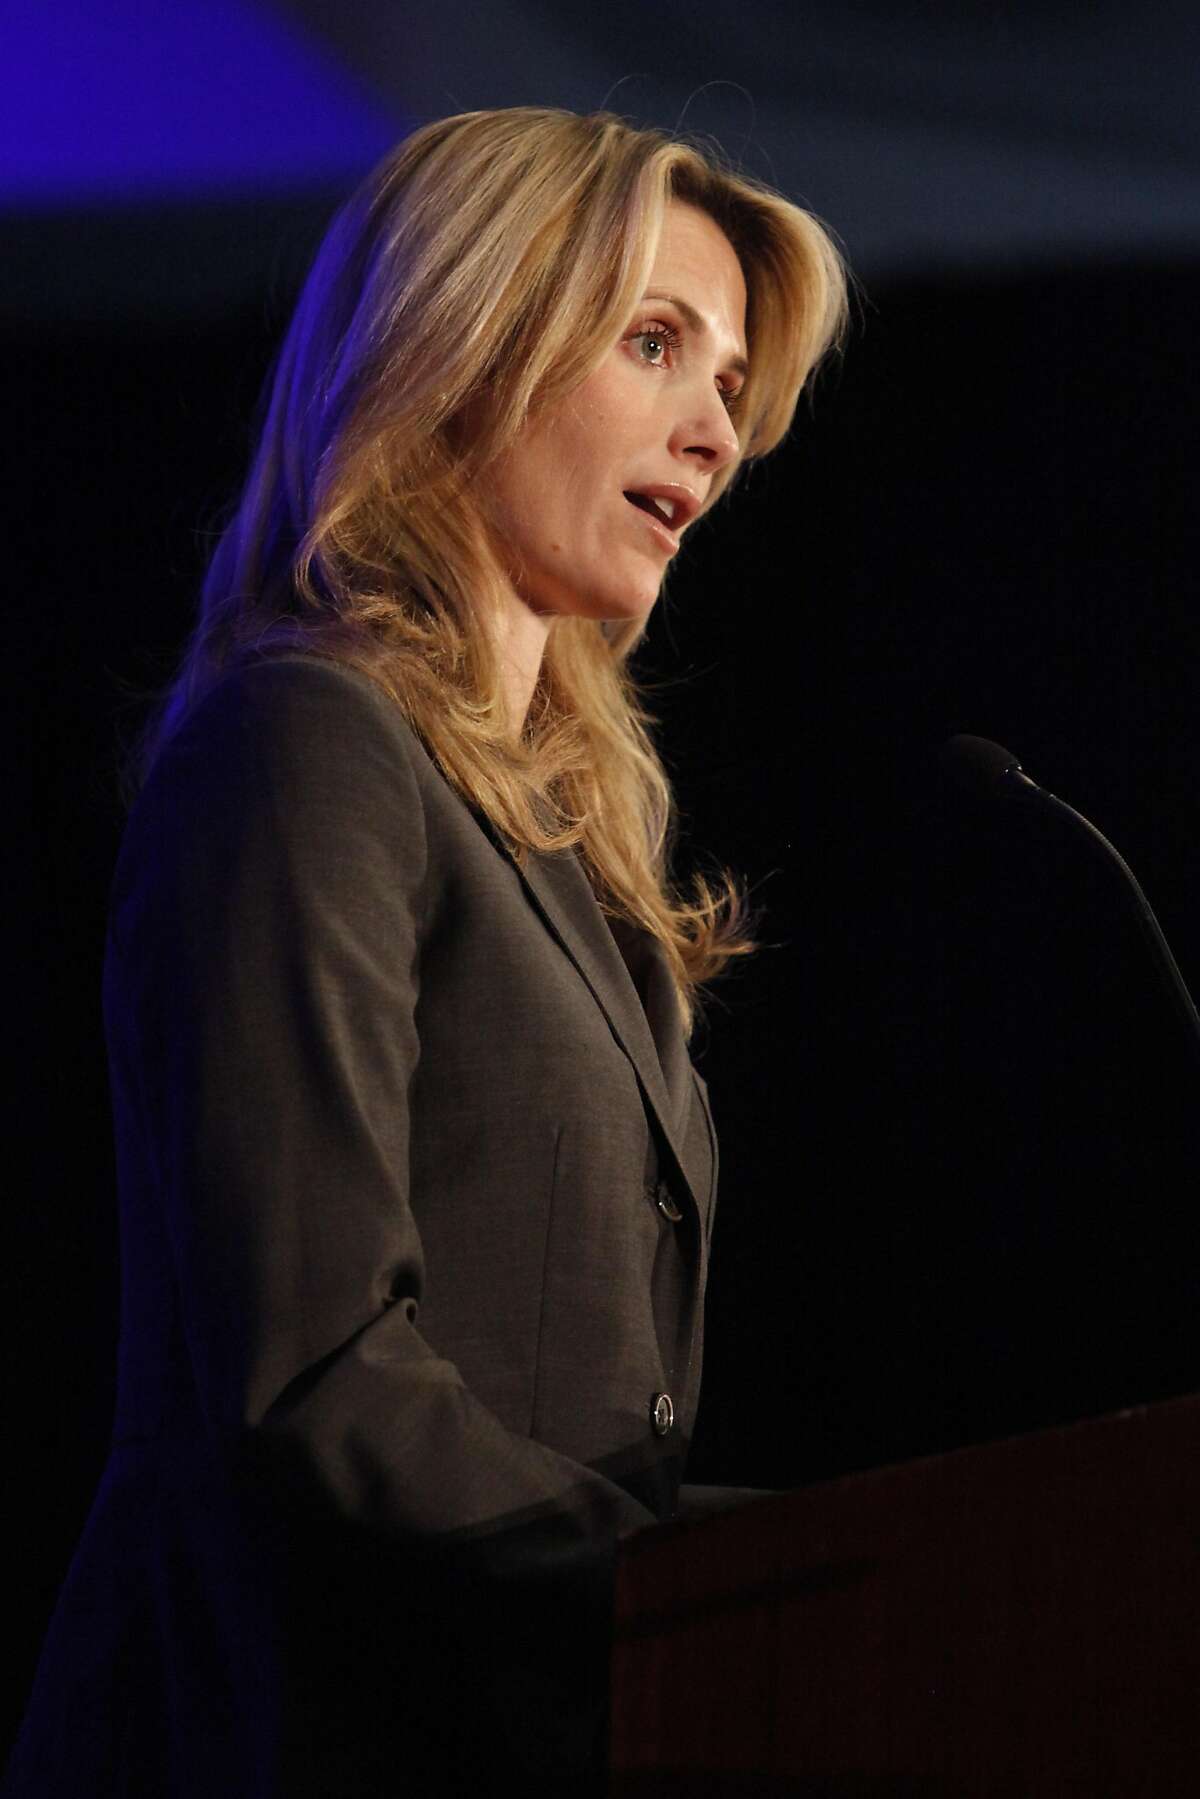 She used to be a registered Republican Siebel Newsom grew up in a politically conservative family, and was a registered Republican until 2008. "I grew up in a household that really revered Reagan," Siebel Newsom told POLITICO. "I think my father's issue was predominantly a fiscally conservative point of view." She added that even though her father is a conservative, he did not vote for Donald Trump in 2016.